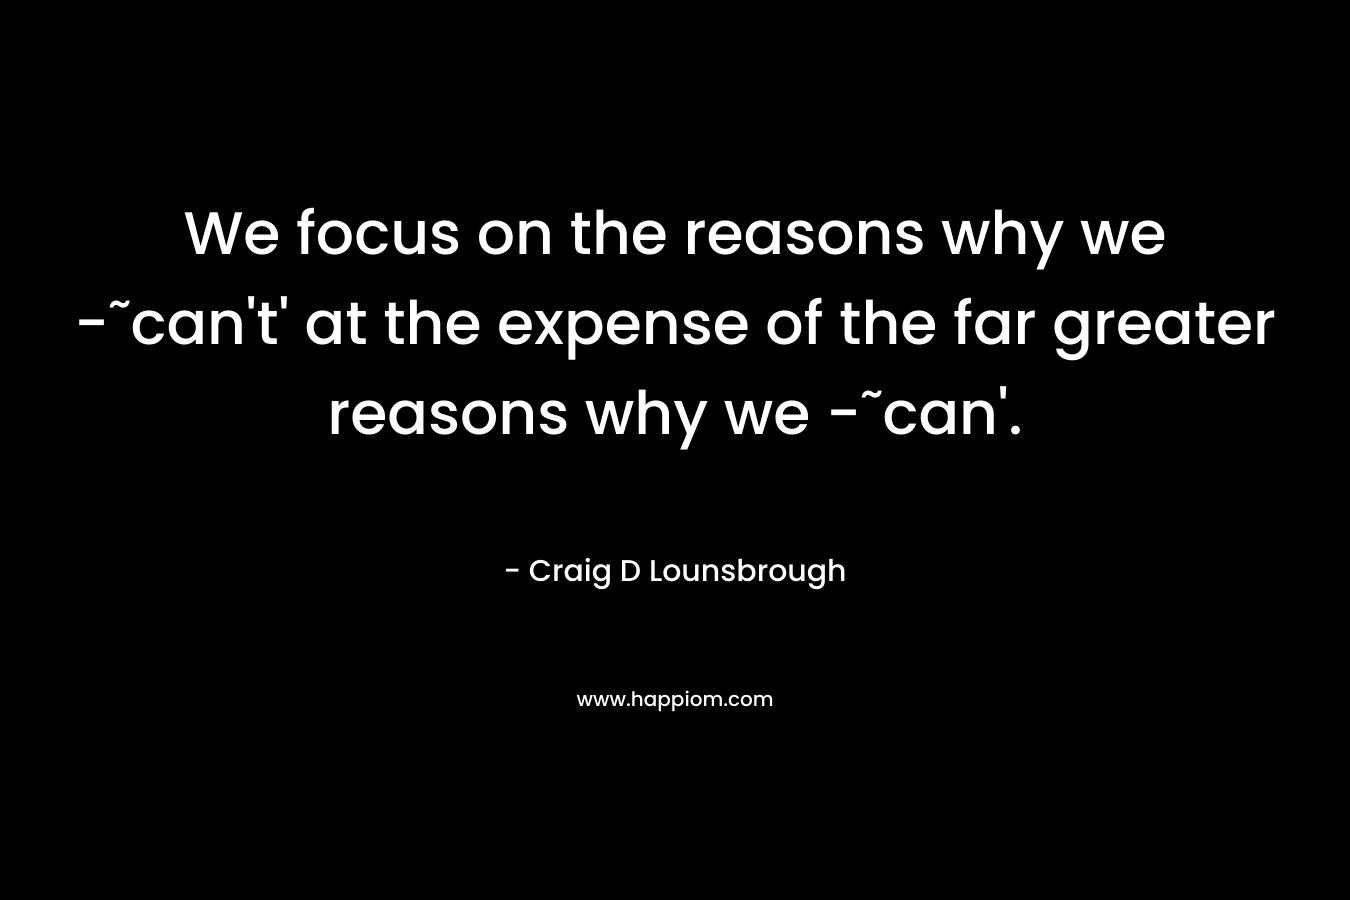 We focus on the reasons why we -˜can't' at the expense of the far greater reasons why we -˜can'.